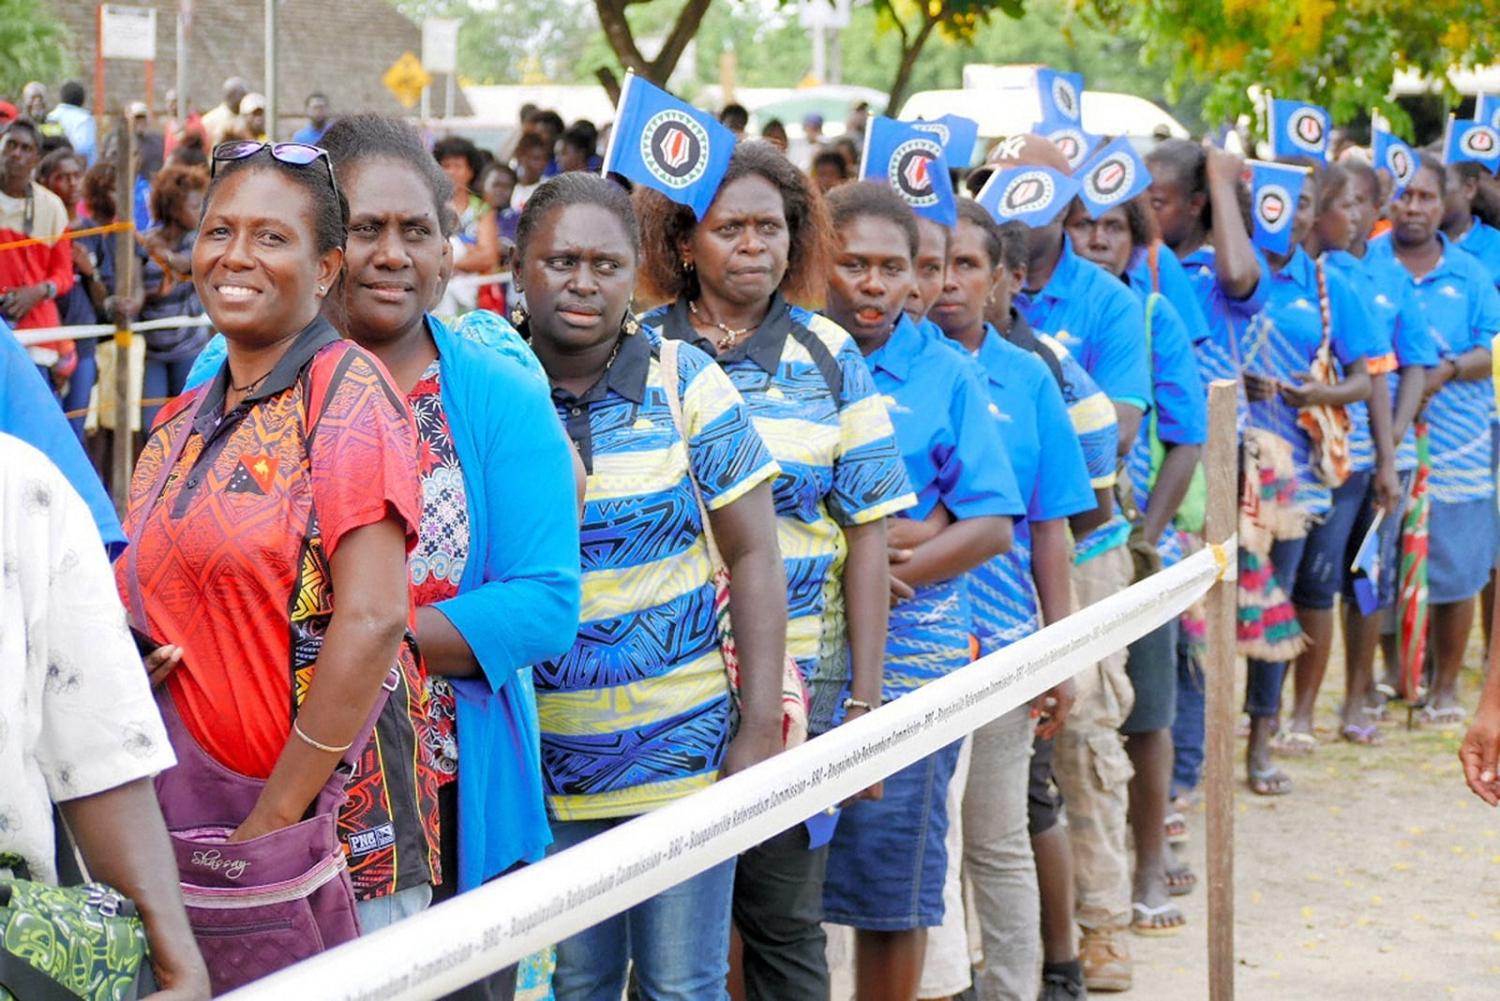 Voters in Buka queue to cast their ballots during the November 2019 Bougainville independence referendum (The Asahi Shimbun via Getty Images)